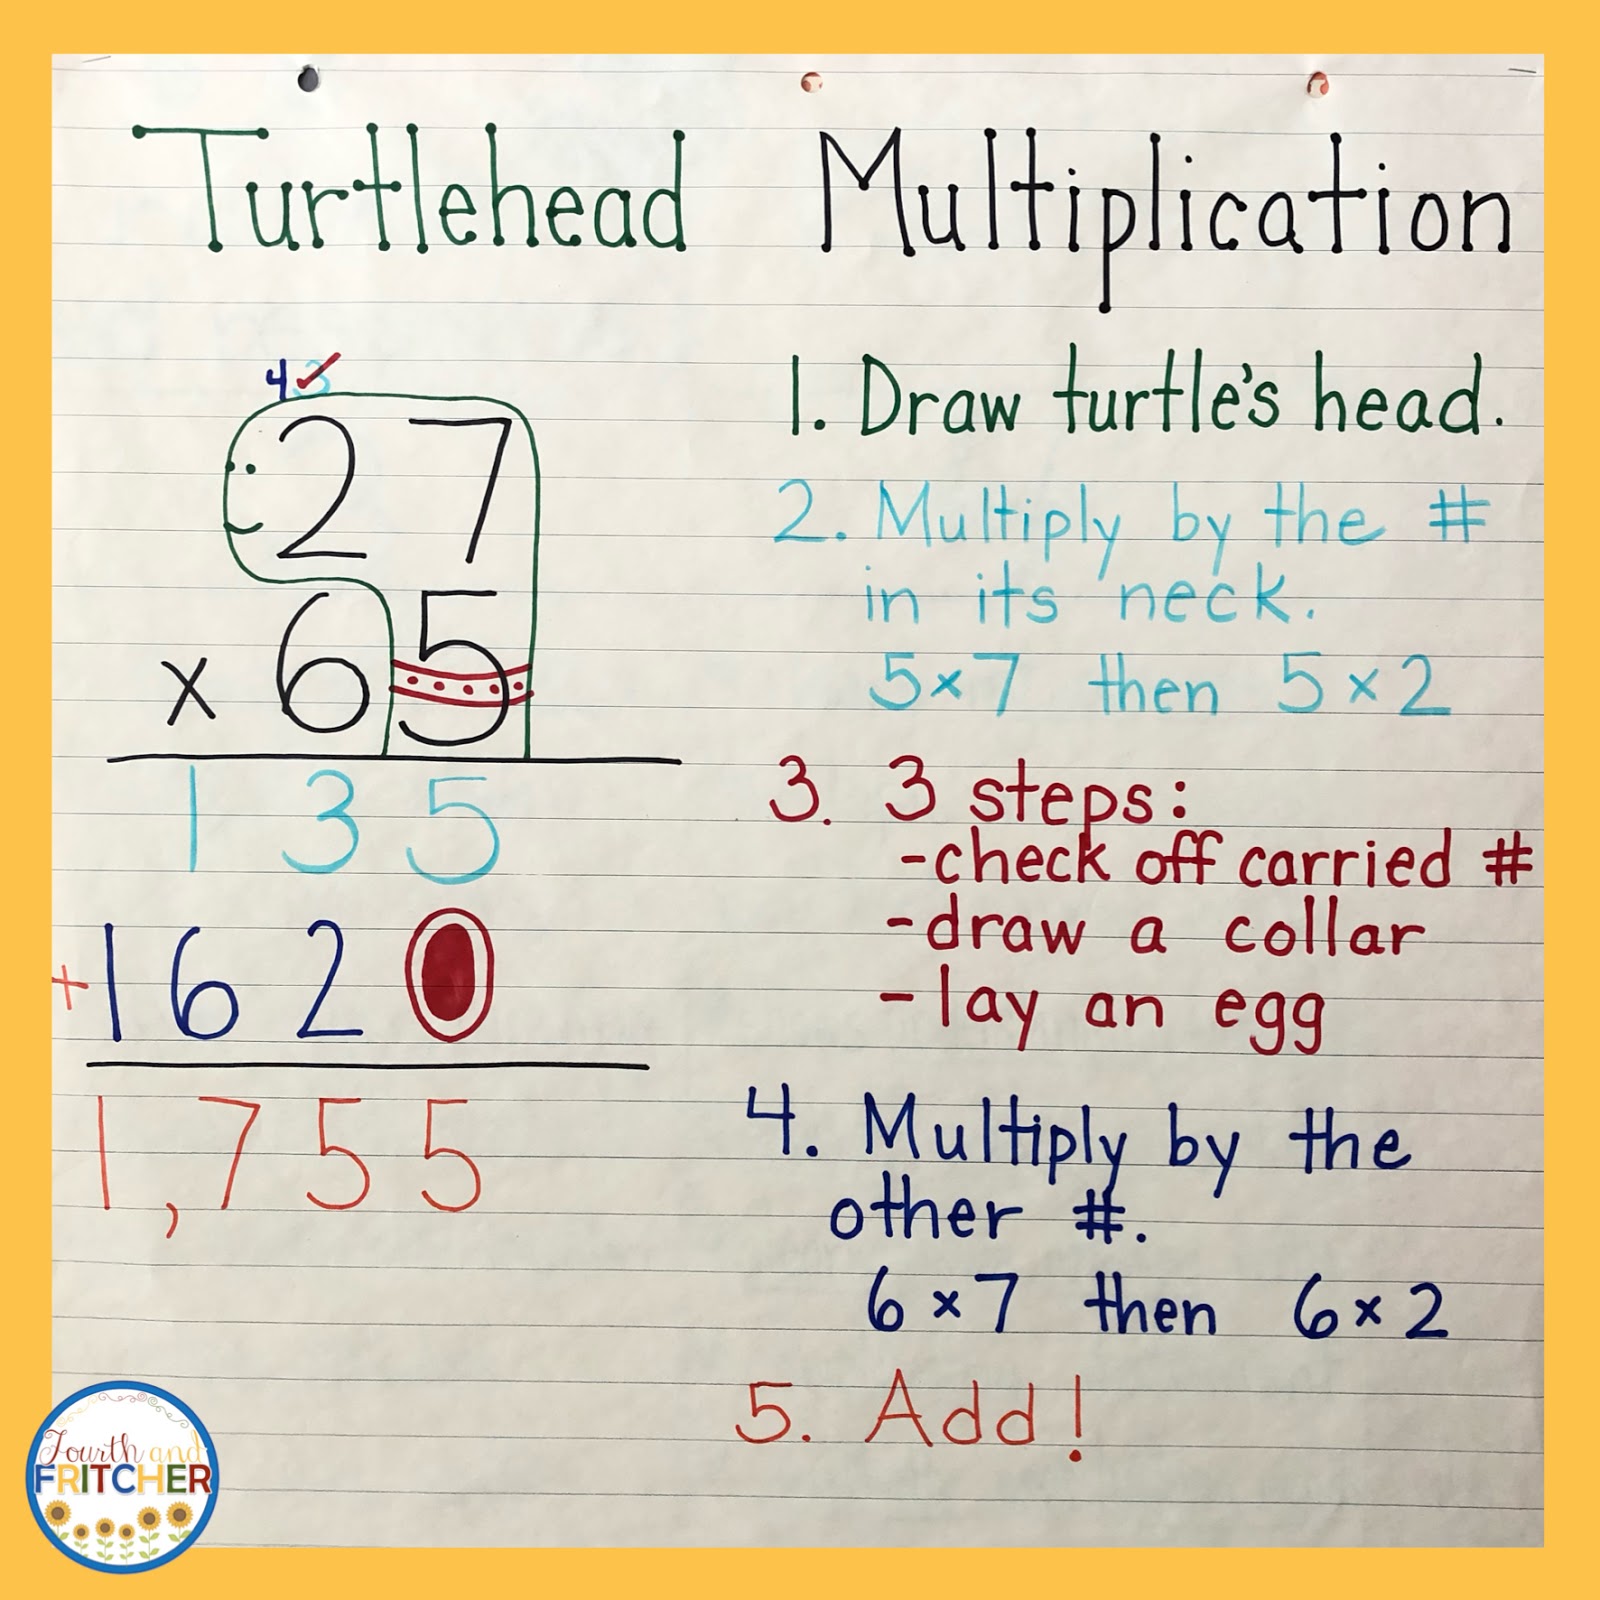 Fourth And Fritcher Double Digit Multiplication Strategies